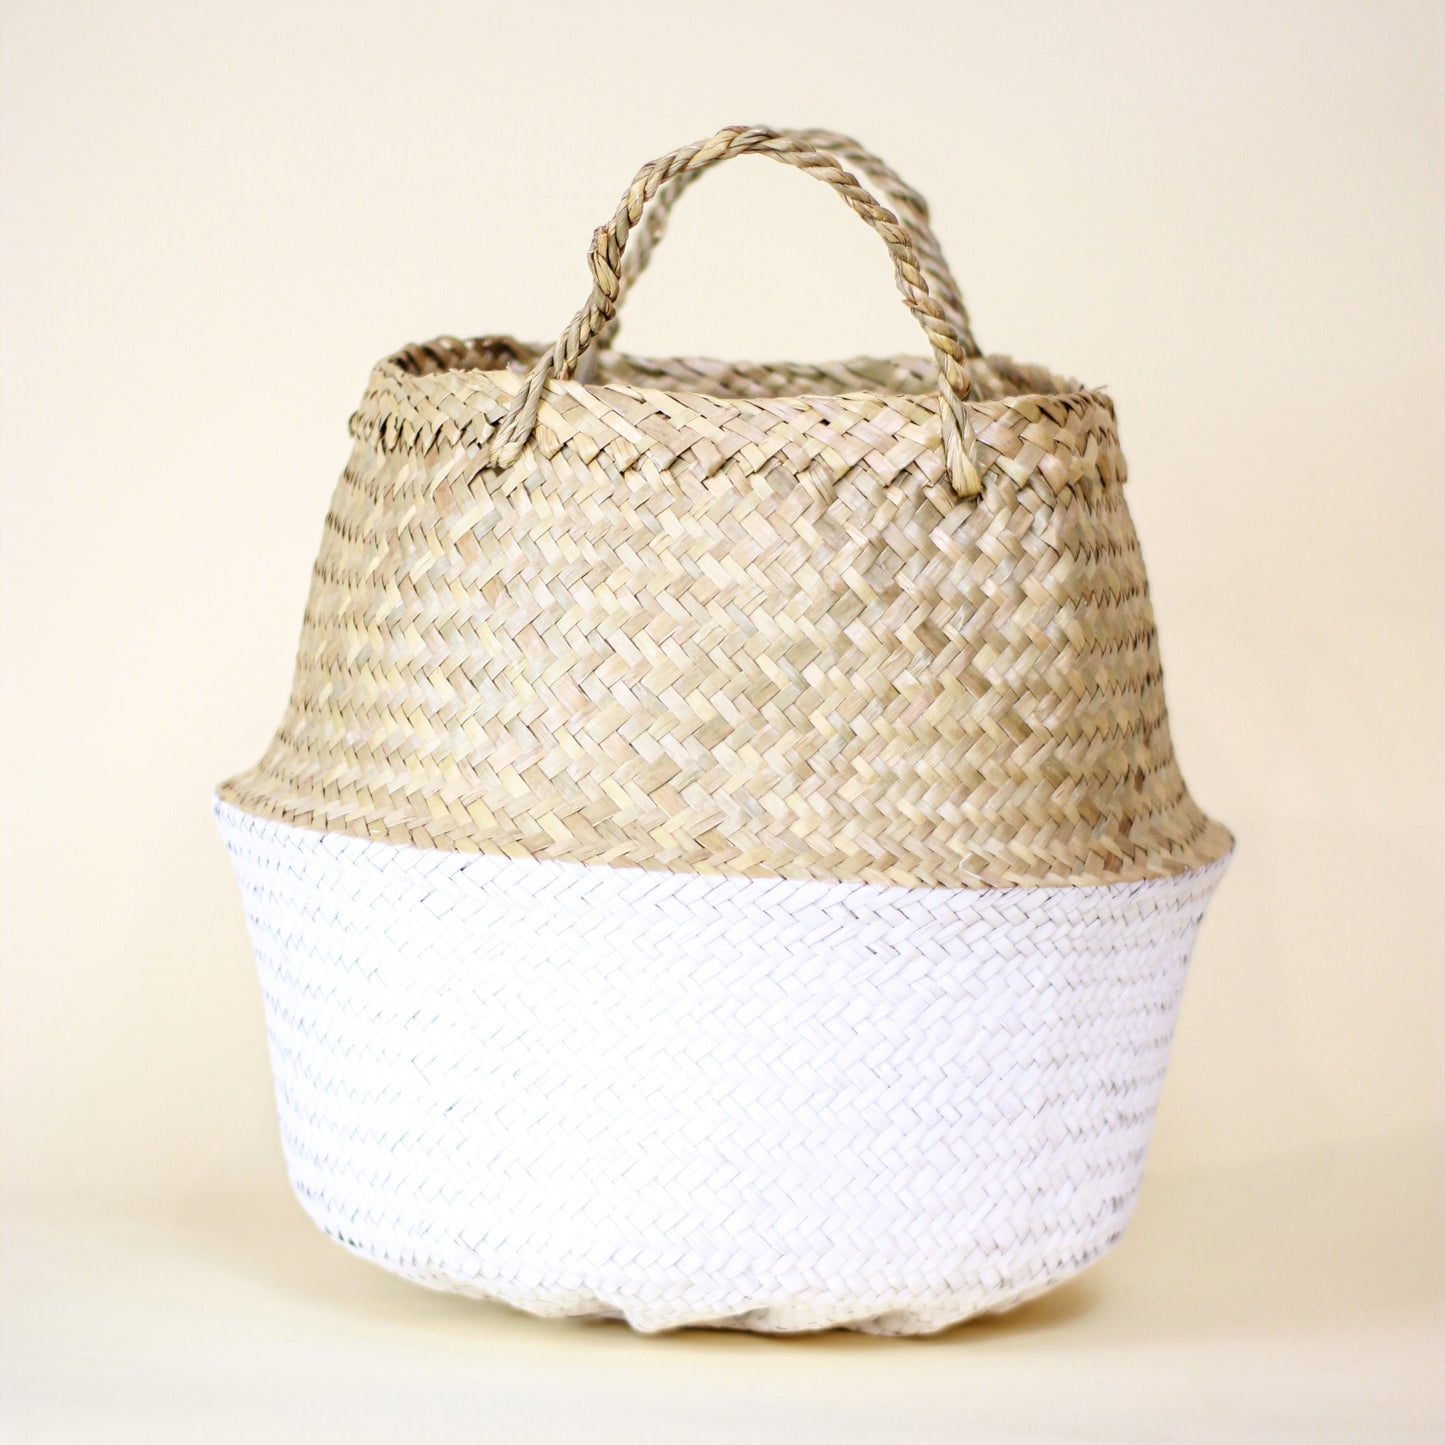 Seagrass White Woven Basket Fits up to 14 inch Nursery Pot